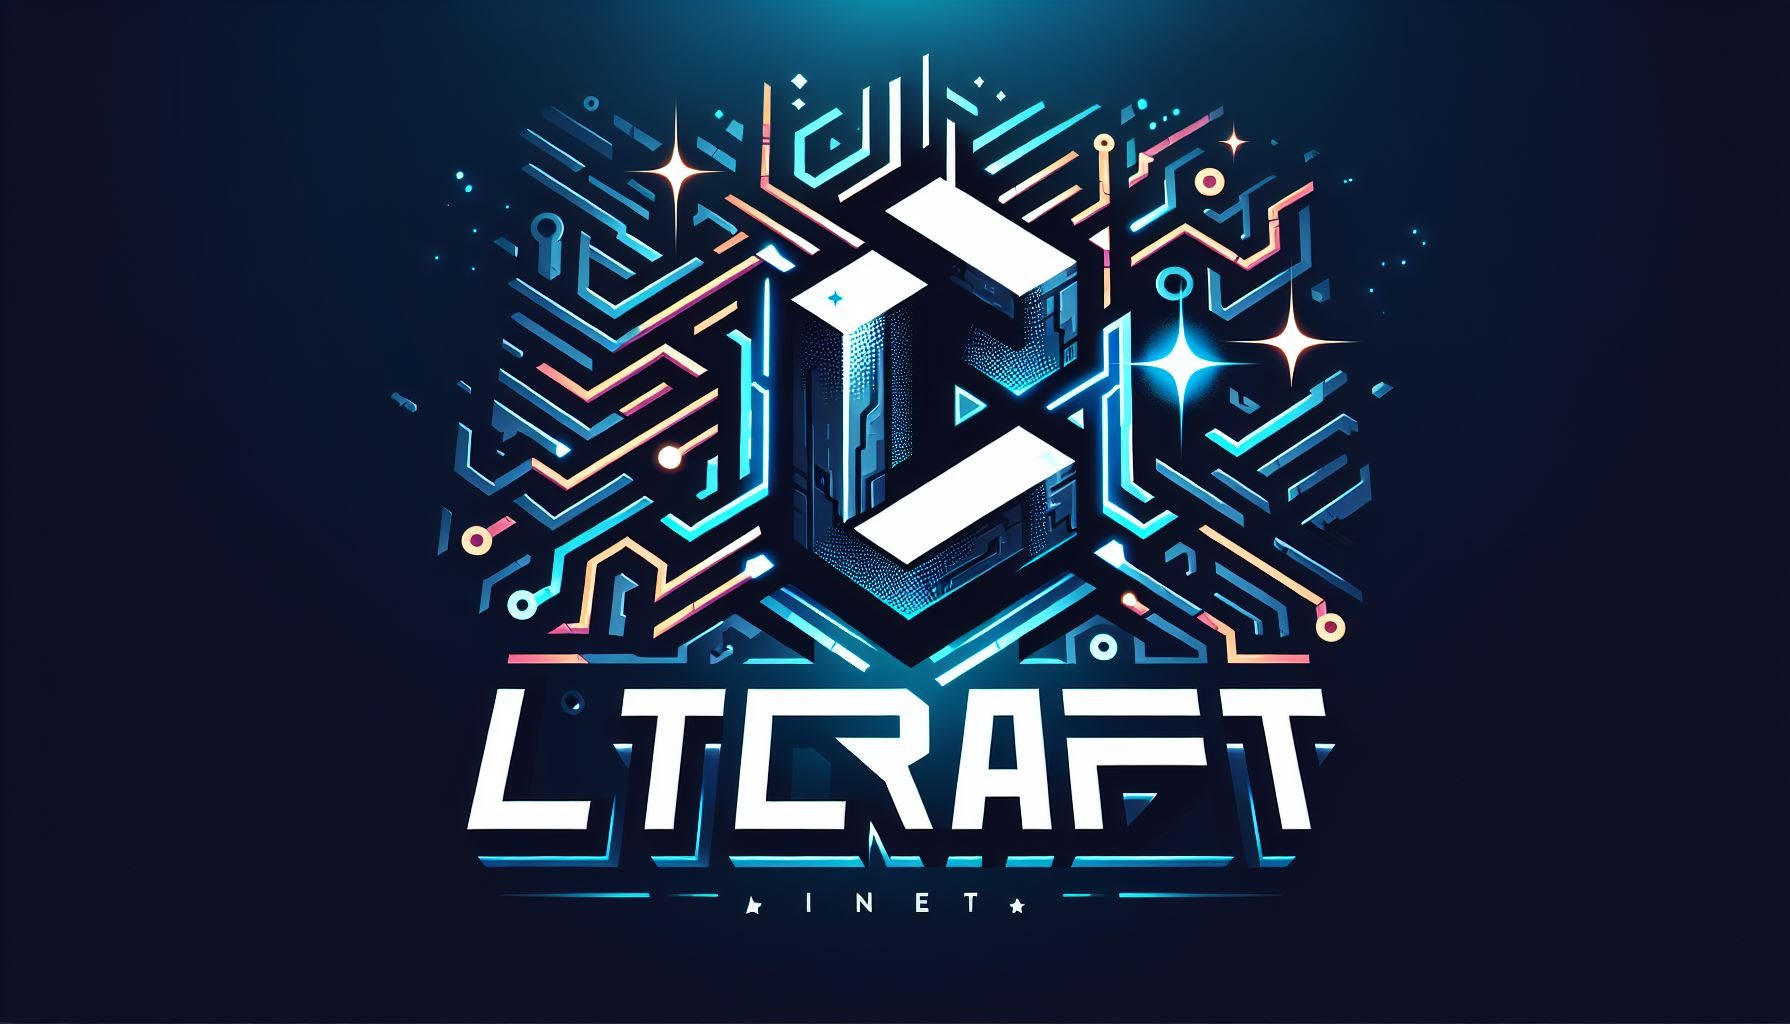 Welcome to Ltcraft.net